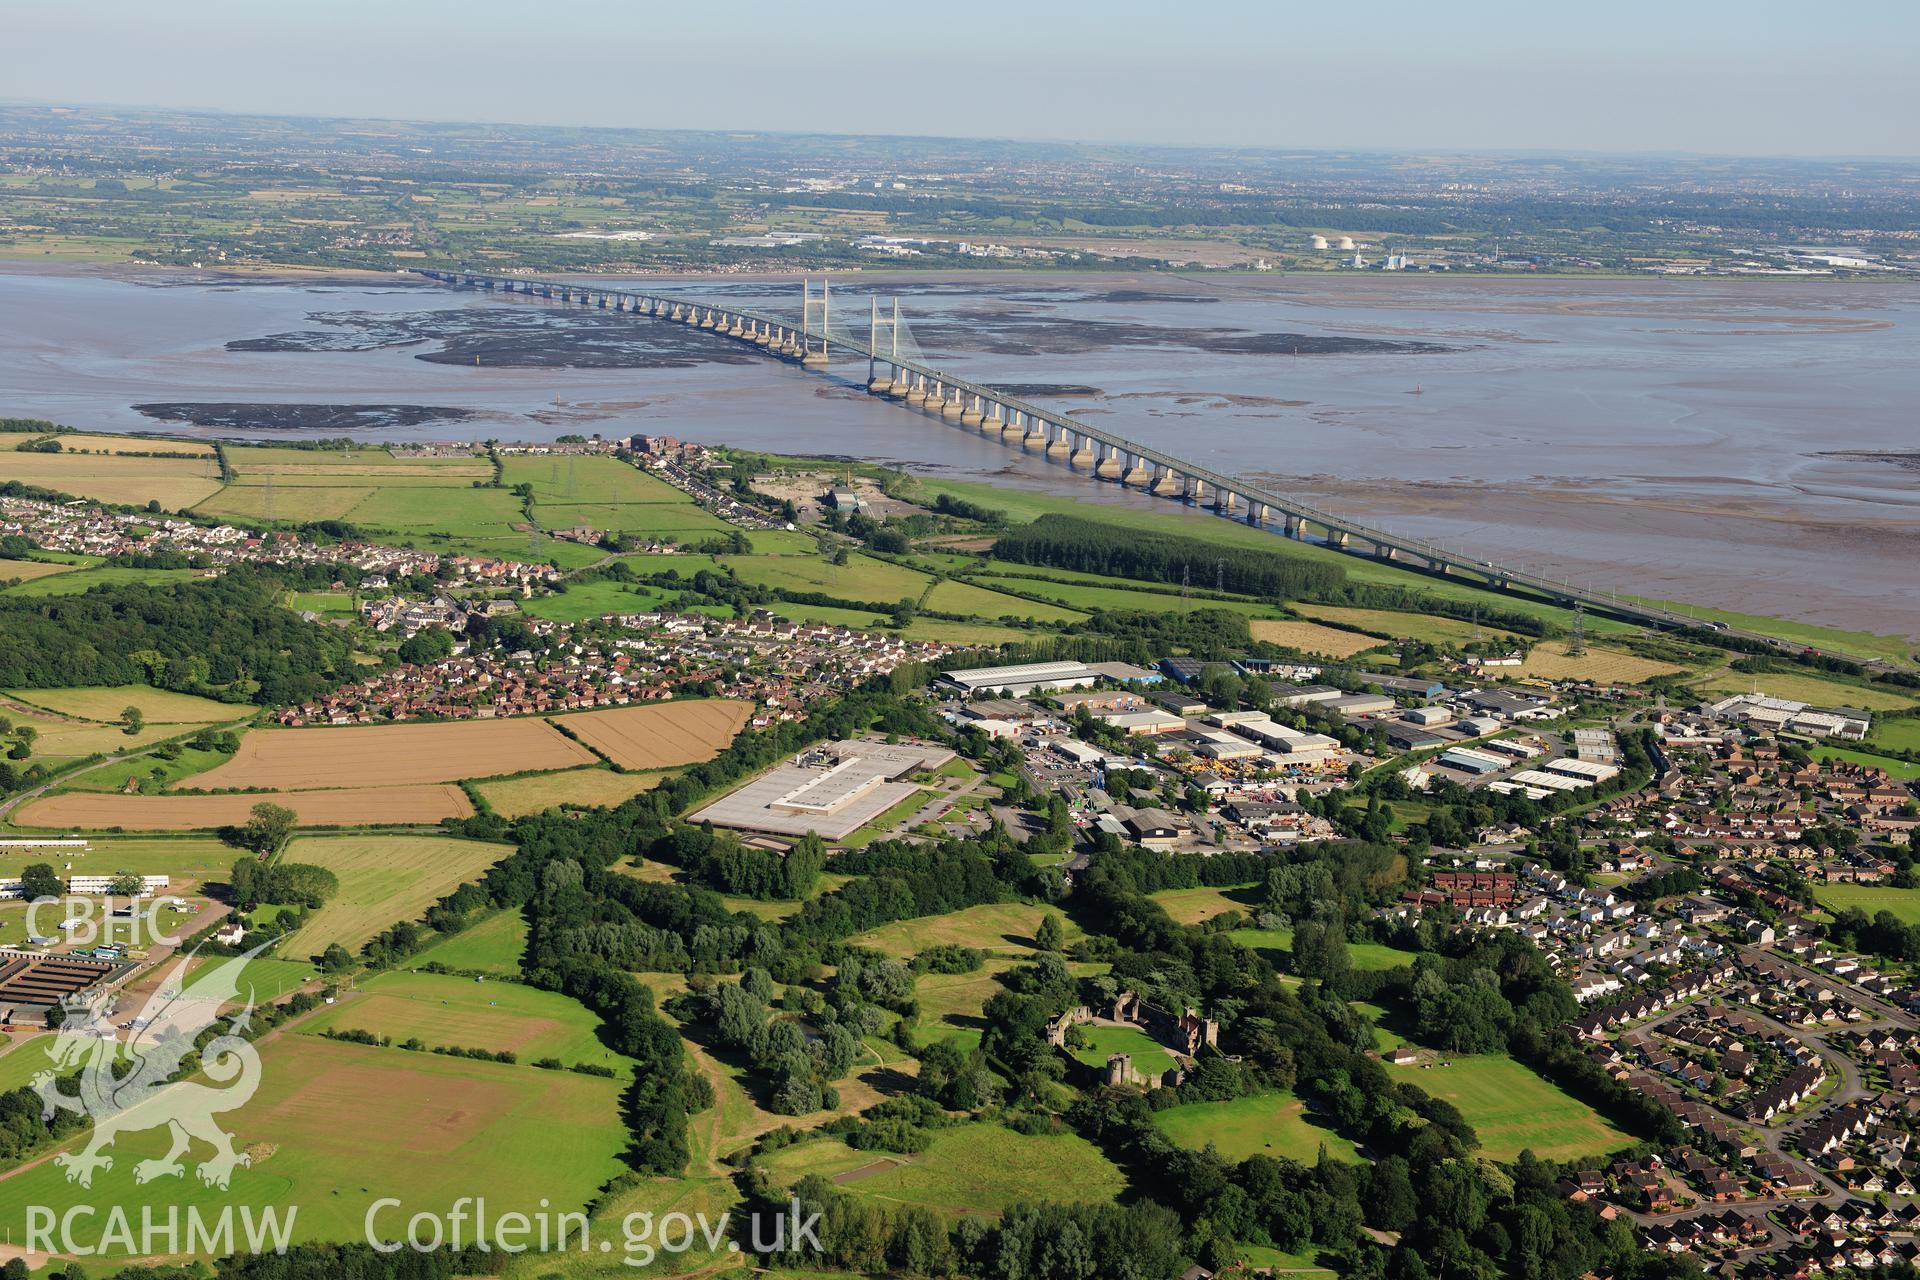 RCAHMW colour oblique photograph of Second Severn Crossing, from Caldicot Castle. Taken by Toby Driver on 24/07/2012.